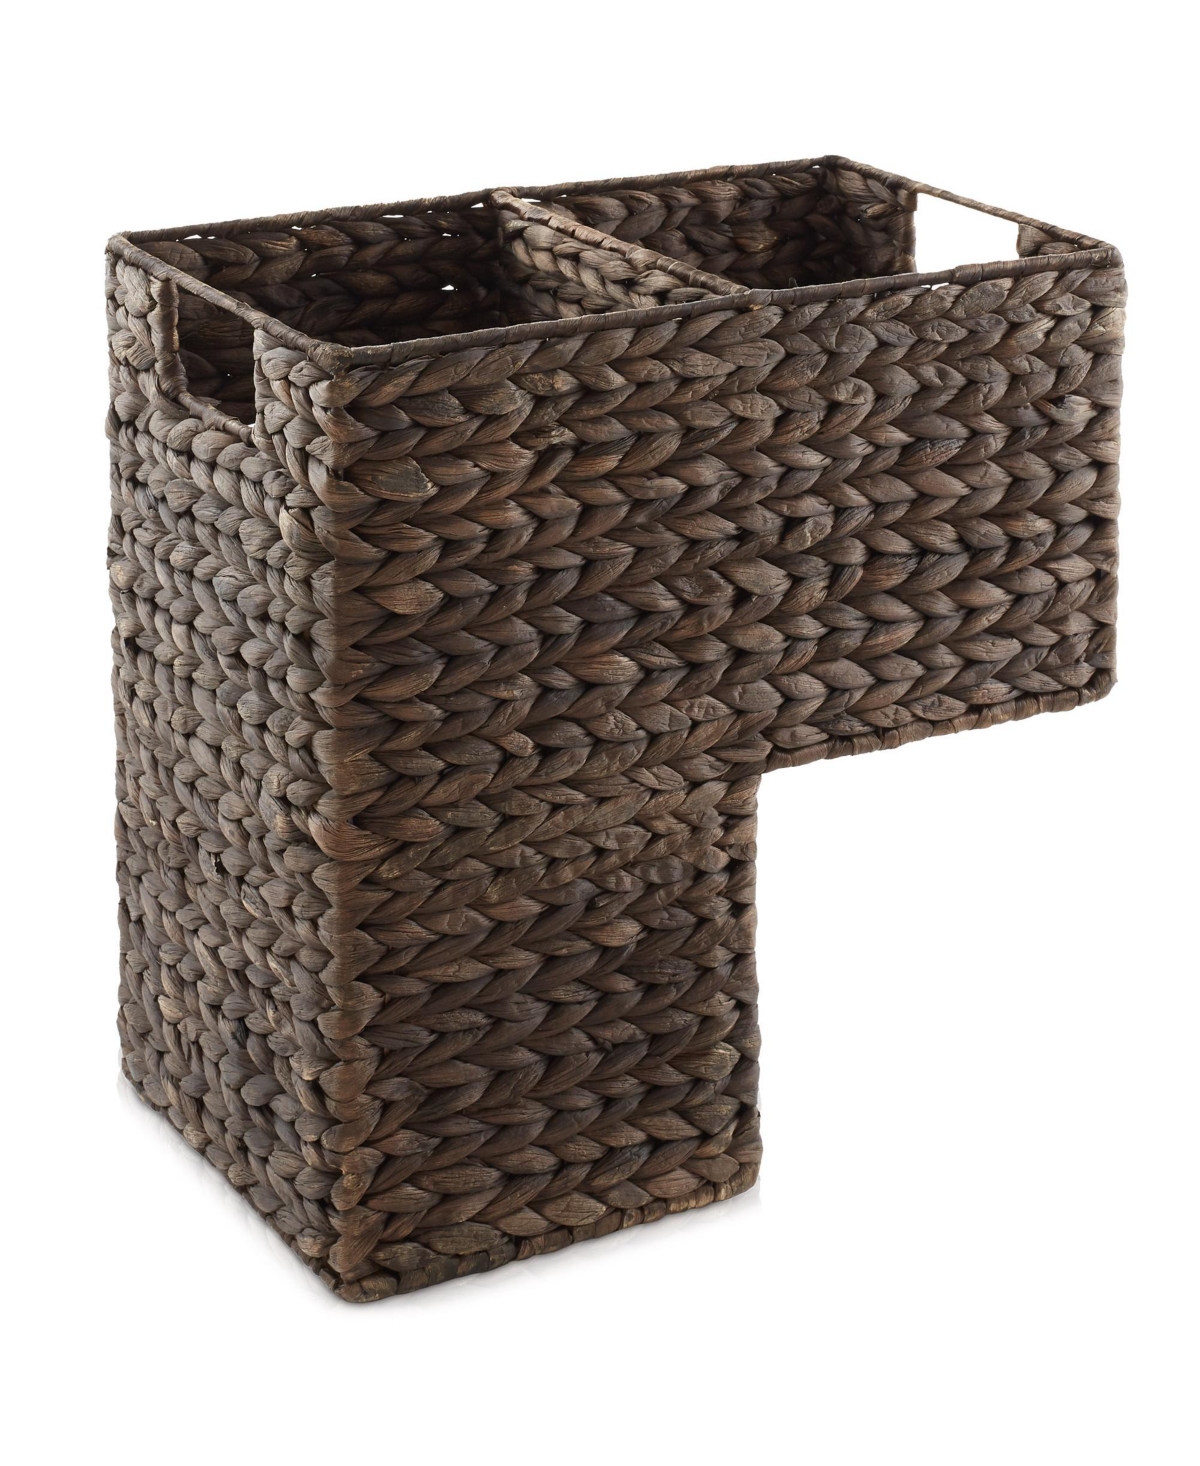 Stair Basket with Handles, Natural - Woven Water Hyacinth Staircase Step Organizer Bin - Espresso - hyacinth